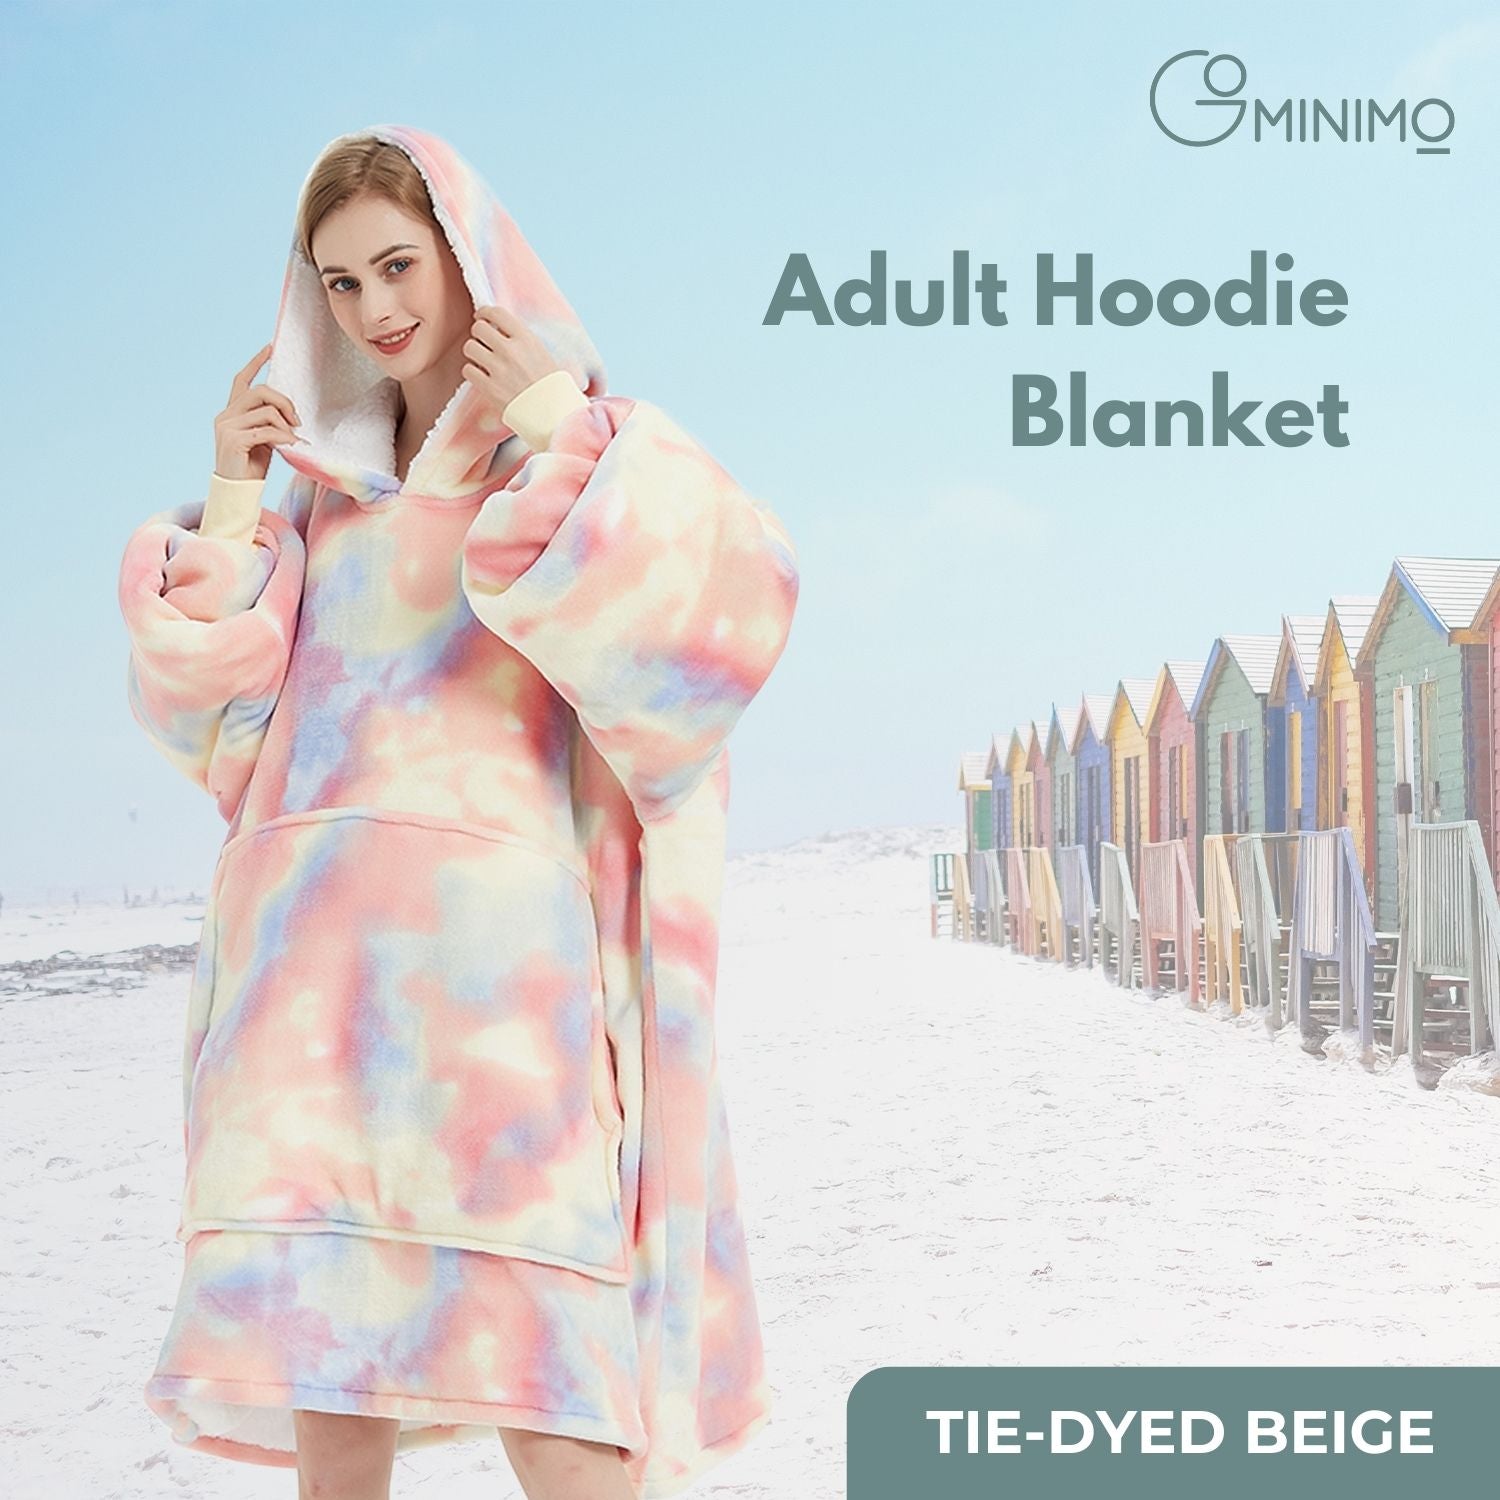 GOMINIMO Hoodie Blanket Adult Tie-Dyed Beige GO-HB-125-AYS from Deals499 at Deals499